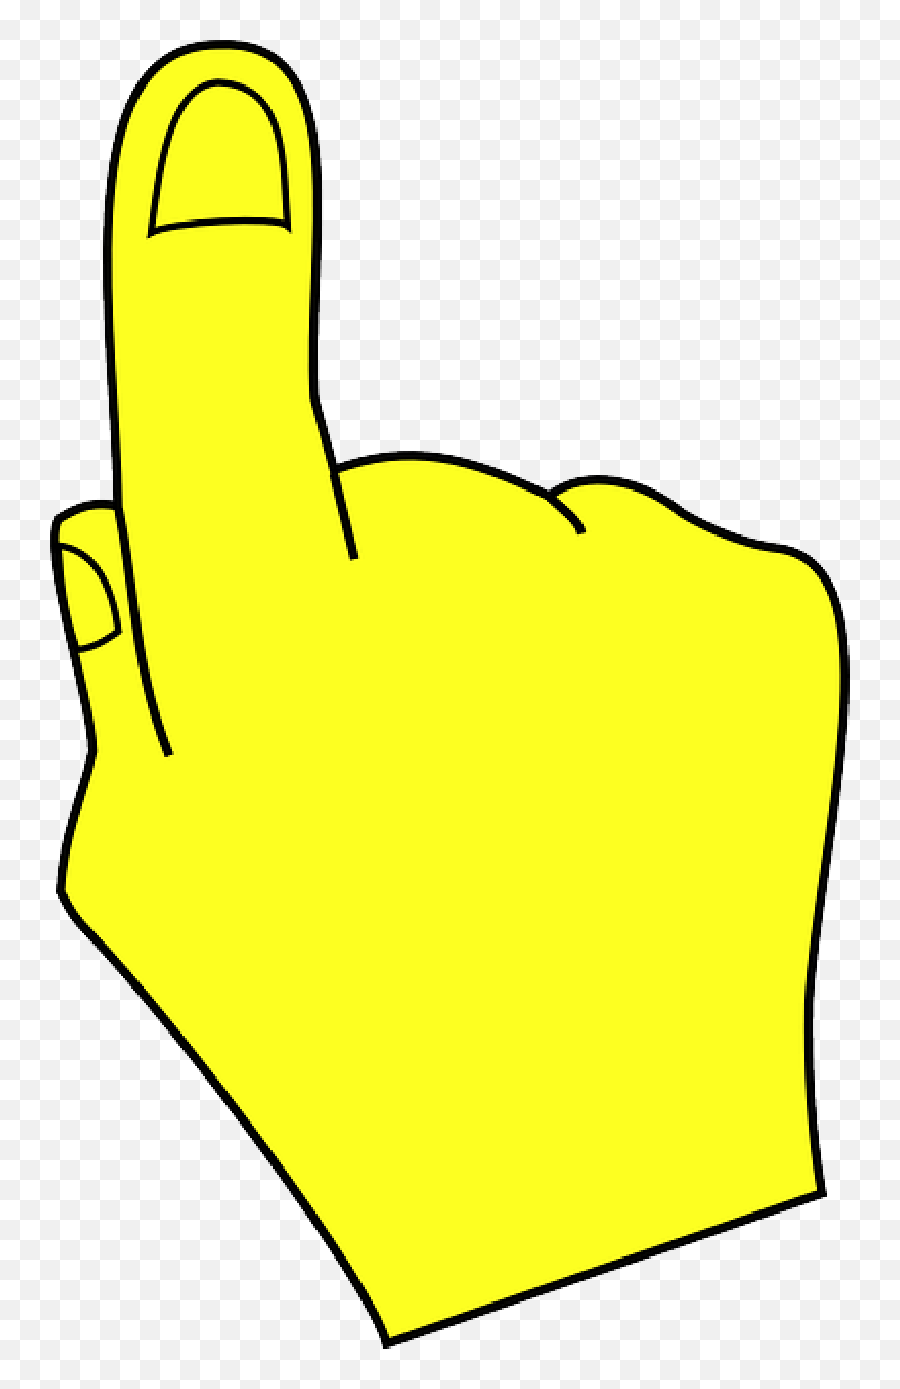 Hand Point Pointing - Free Vector Graphic On Pixabay Pointing Hand Clipart Png,Pointing Finger Png